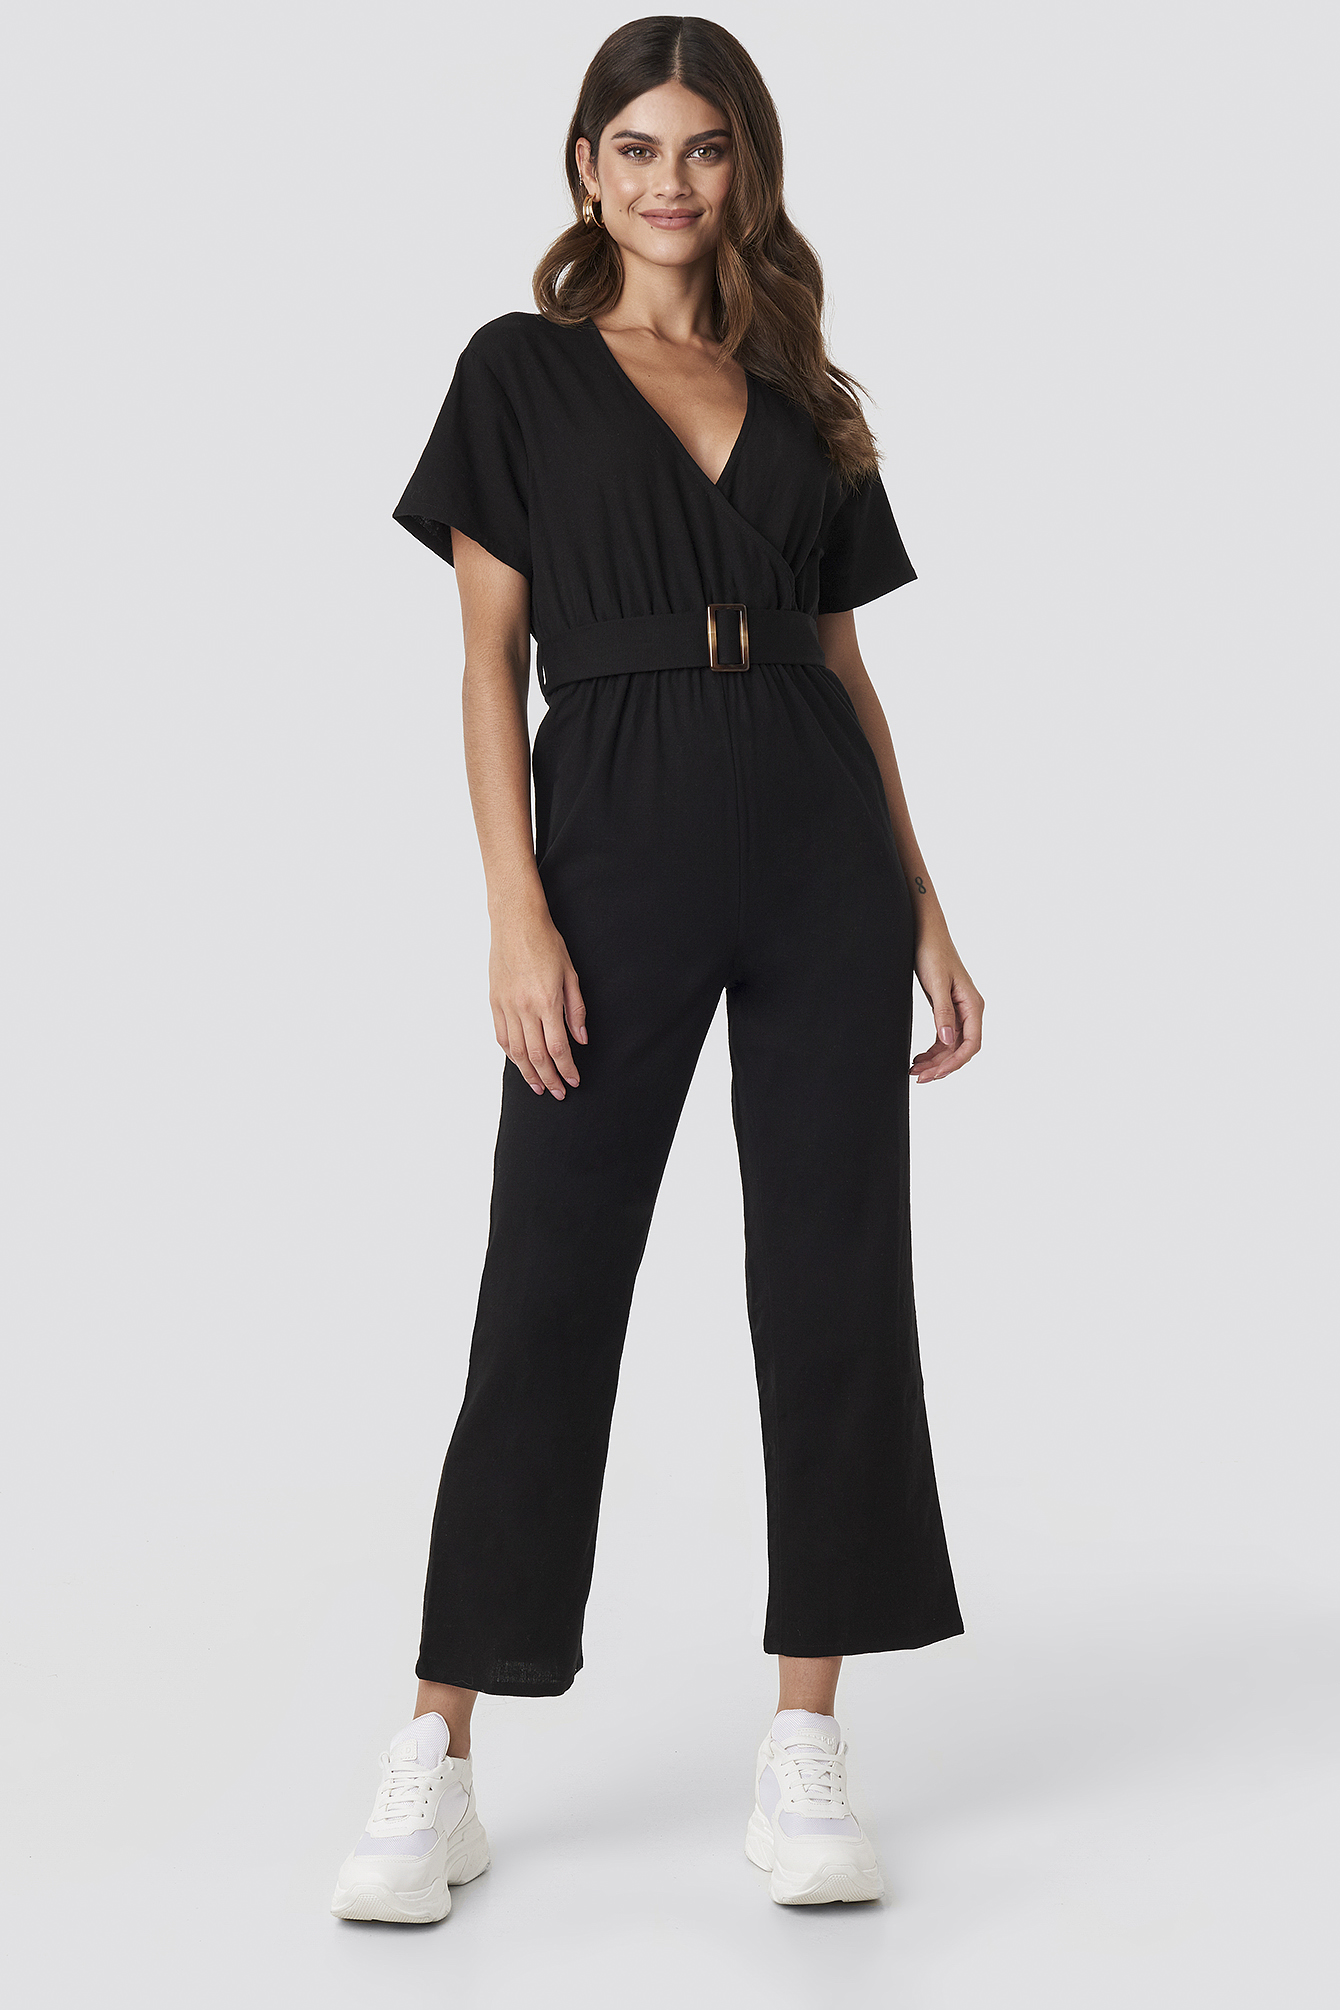 Black Hannalicious x NA-KD Overlapped Belted Linen Look Jumpsuit